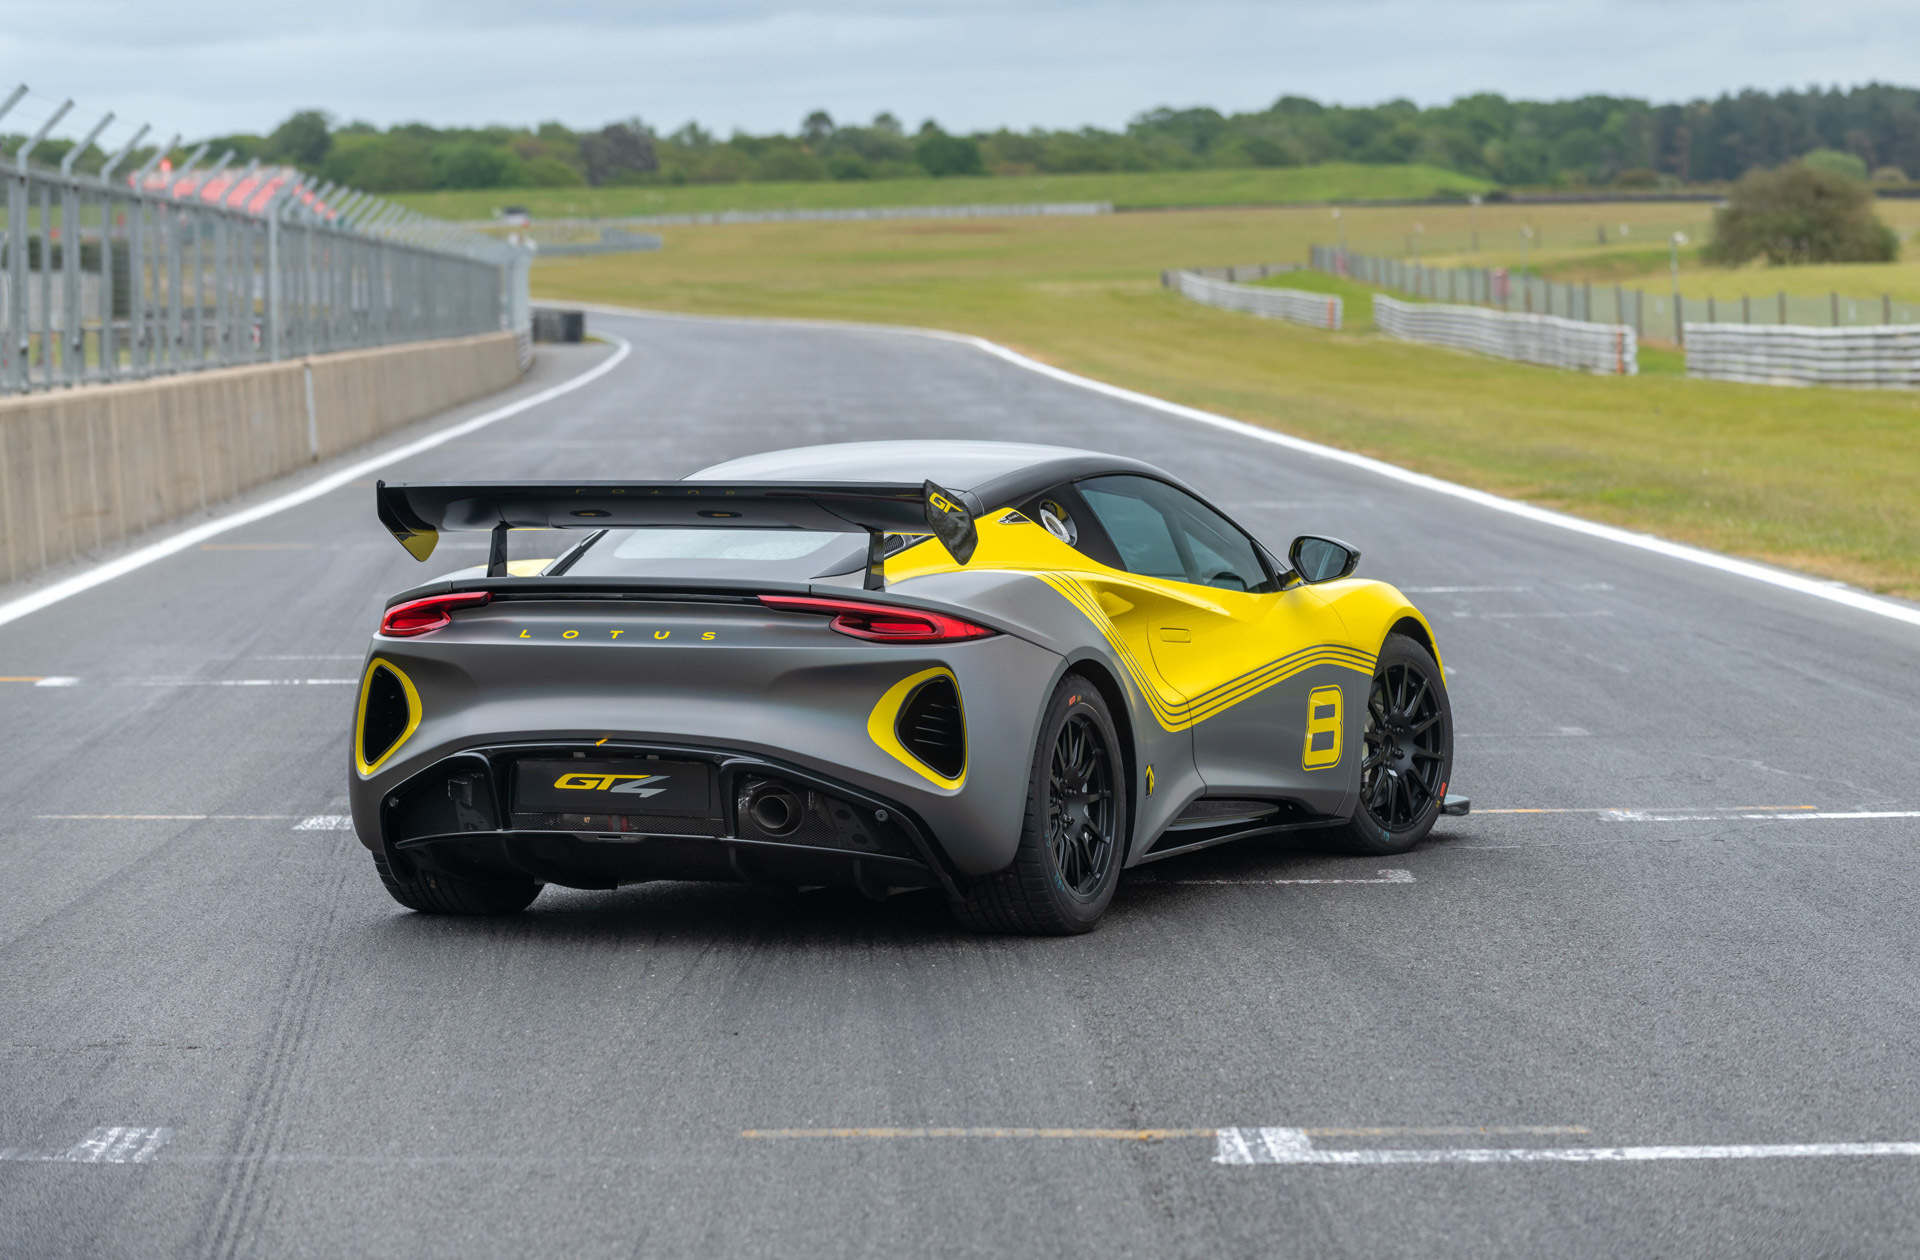 Lotus Emira GT4 Race Car Debuts With More Wings, Less Weight